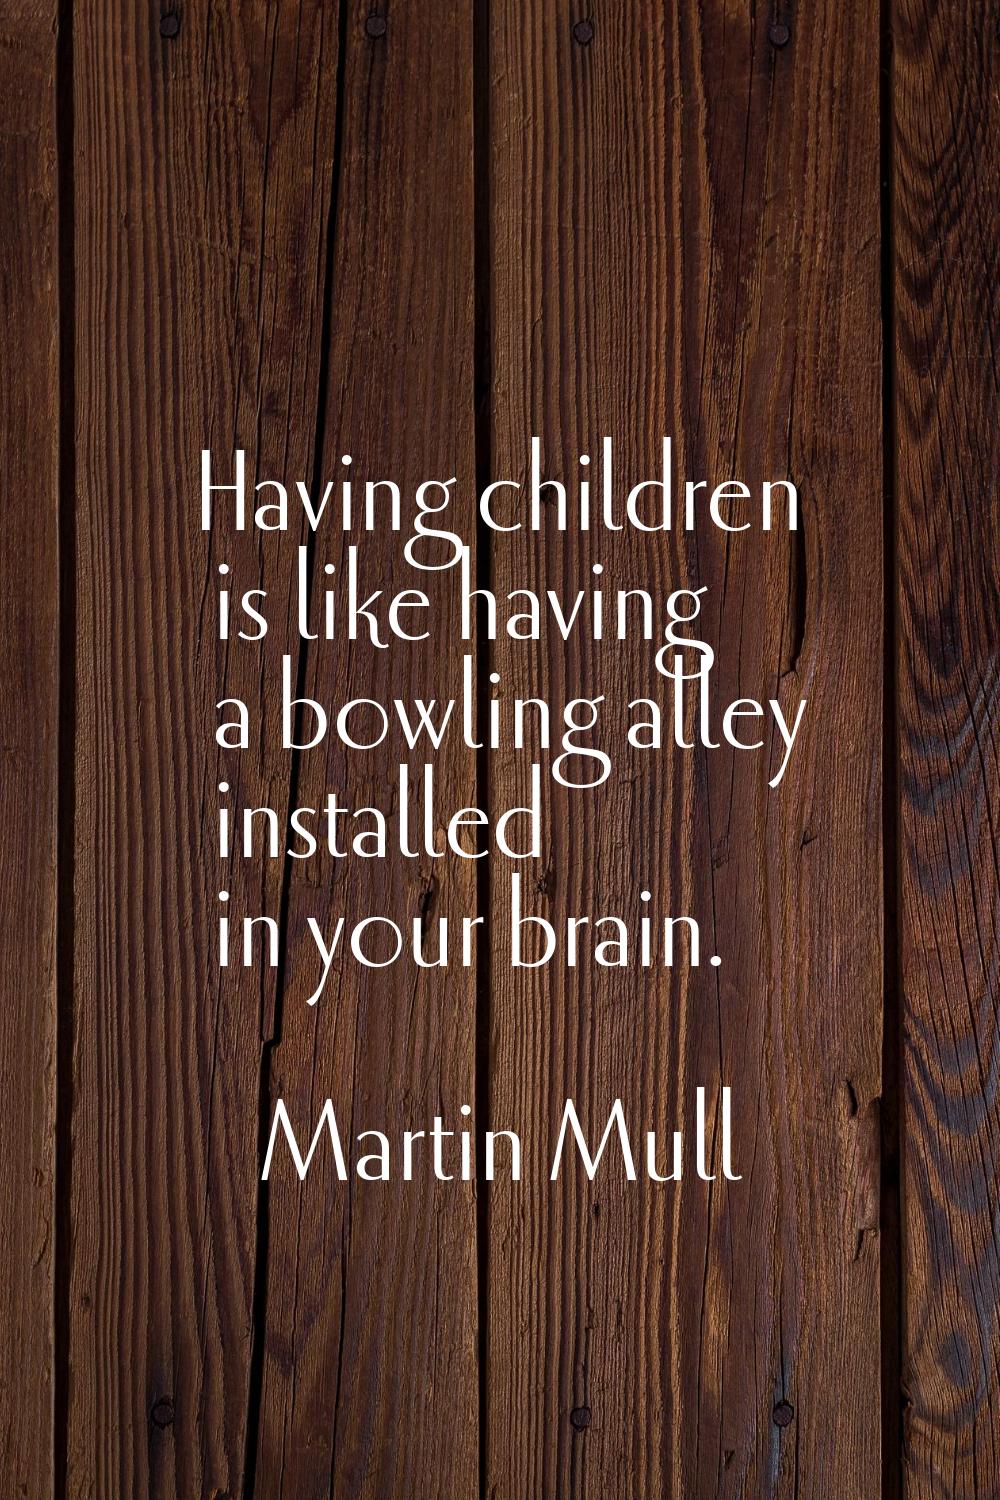 Having children is like having a bowling alley installed in your brain.